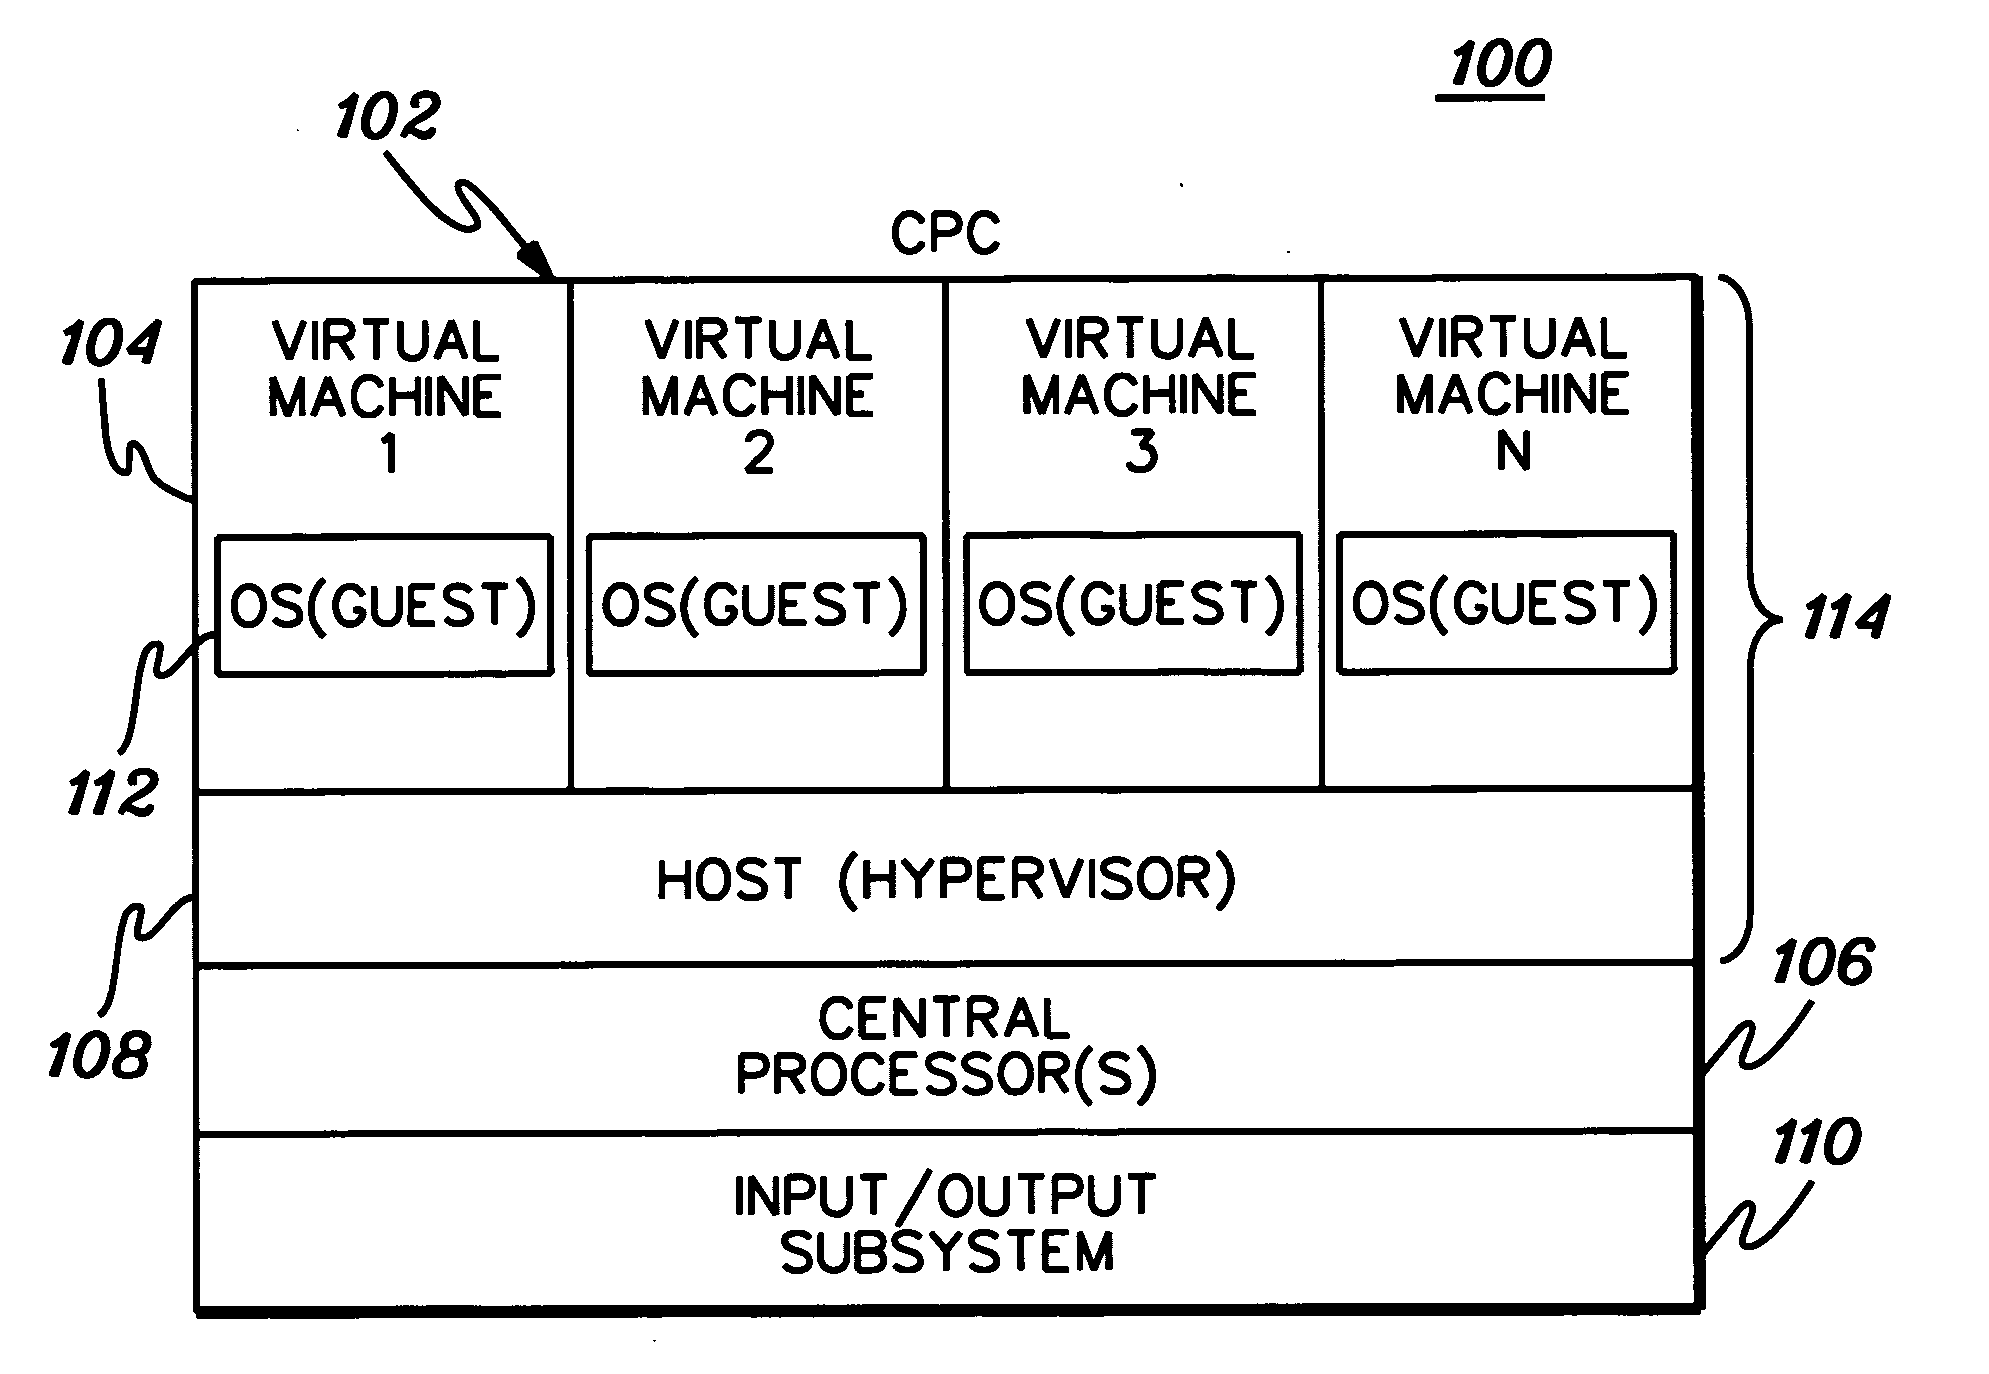 Facilitating processing within computing environments supporting pageable guests